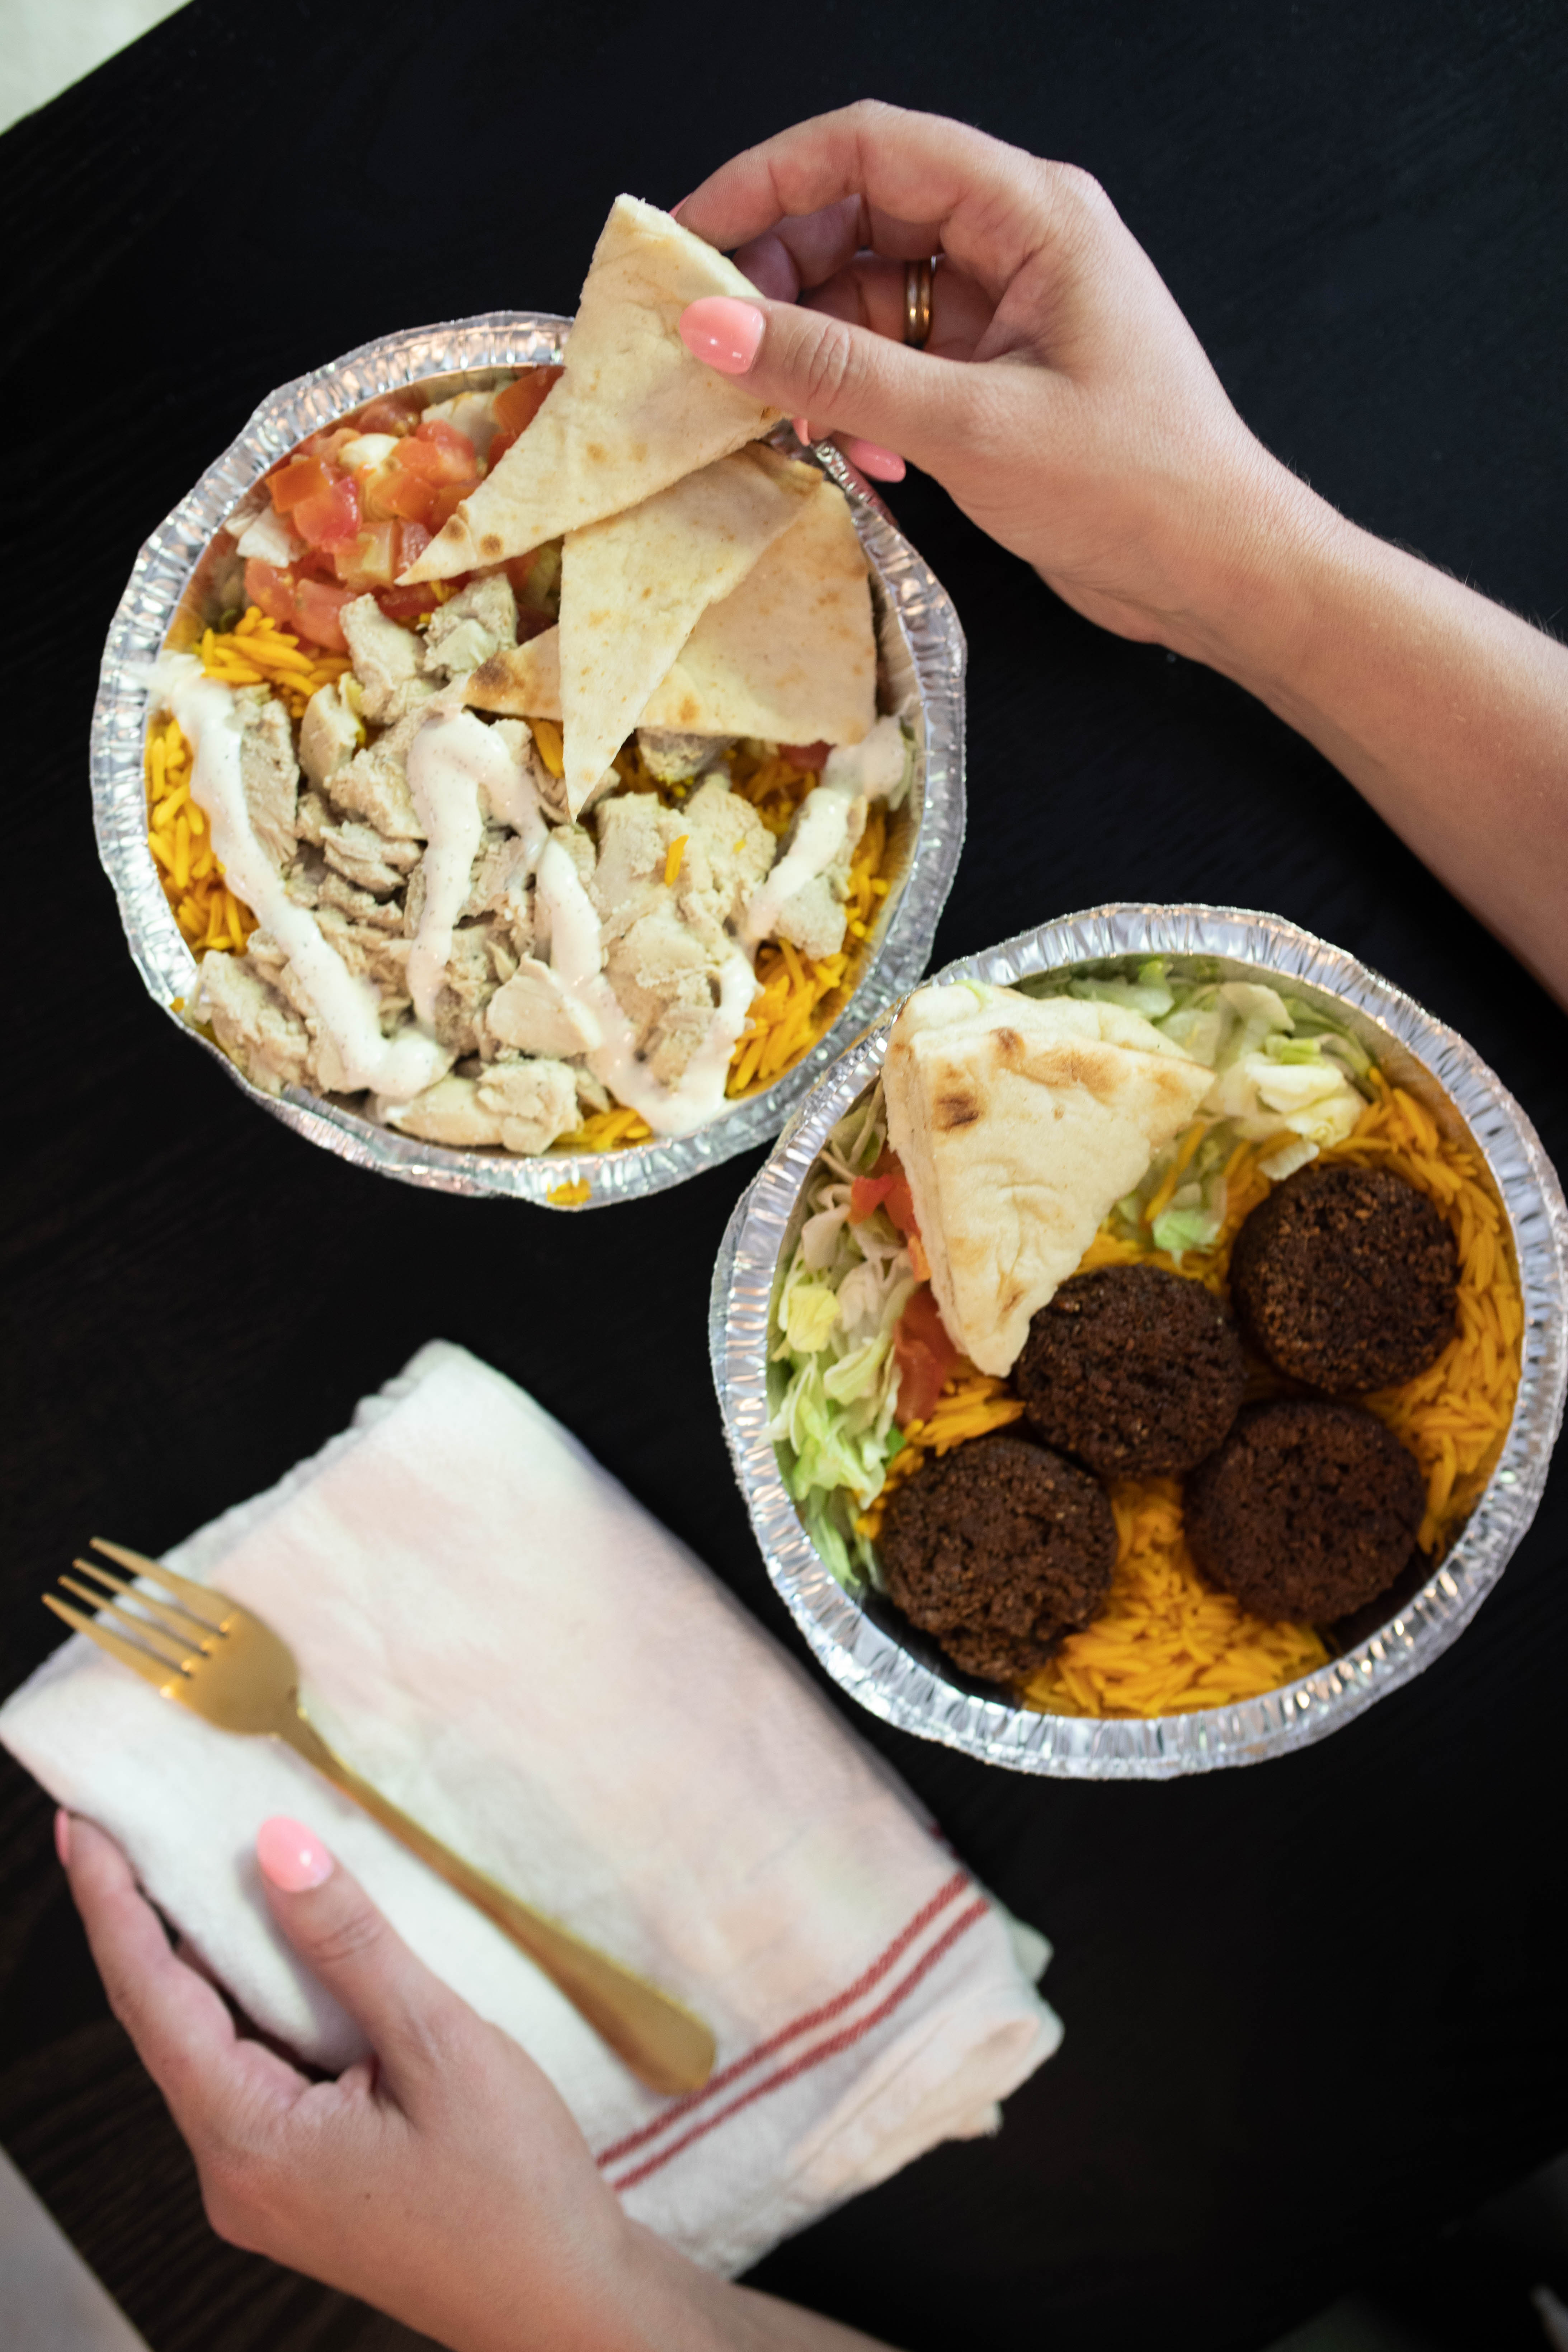 Halal Guys Platter and Falafel from club feast